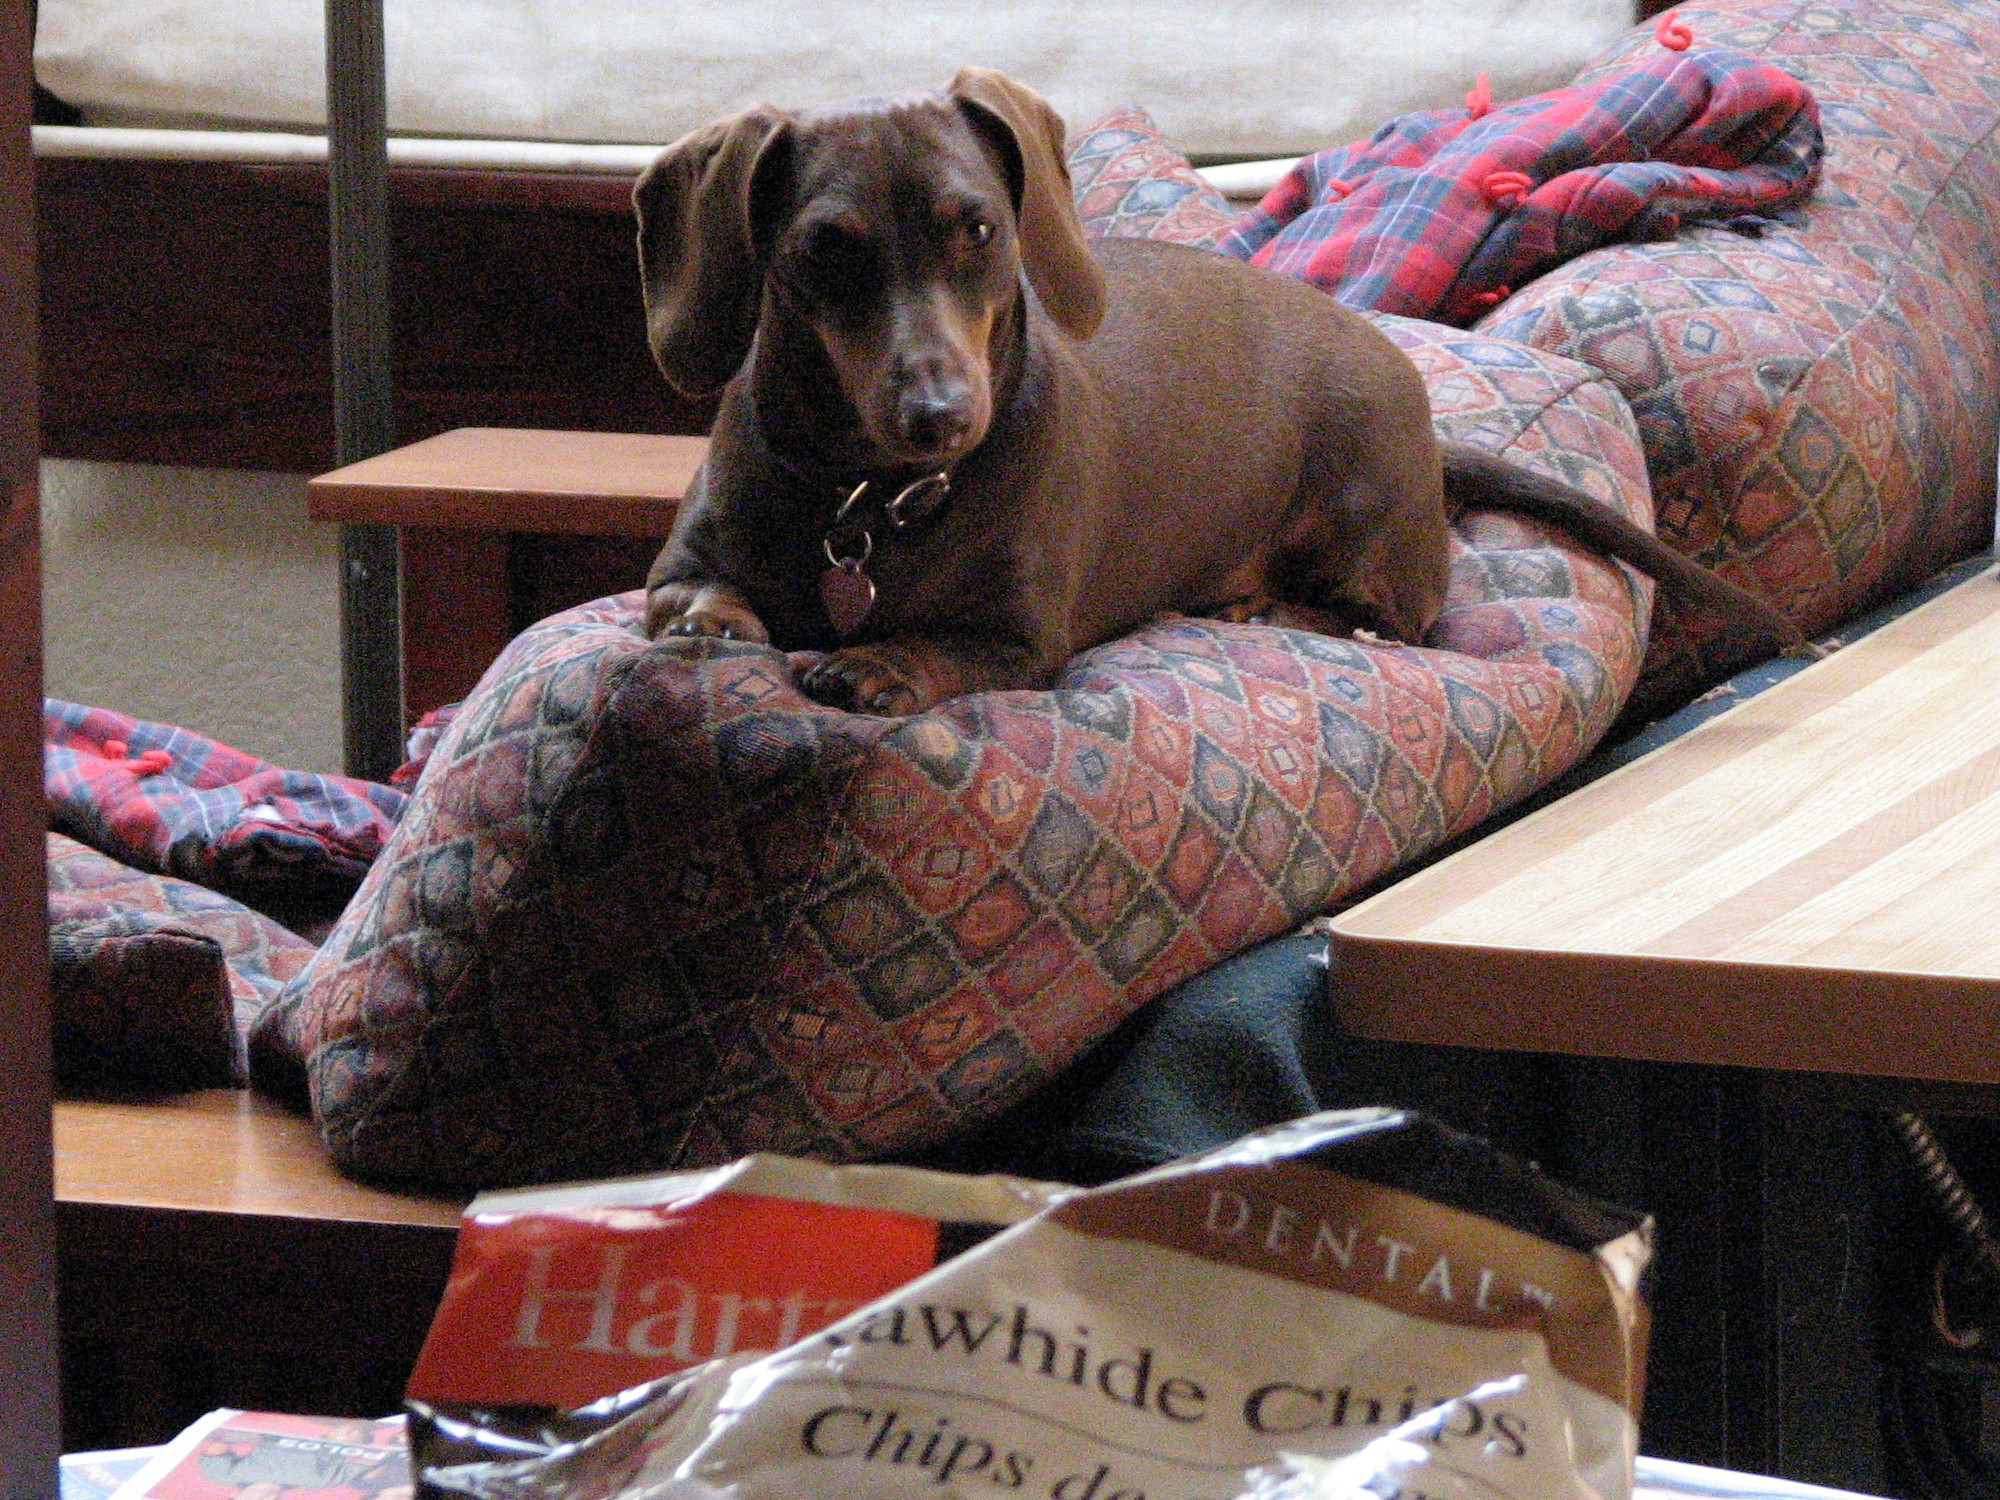 A dachshund sitting on the back of a couch attempting to get rawhide chewies on the counter